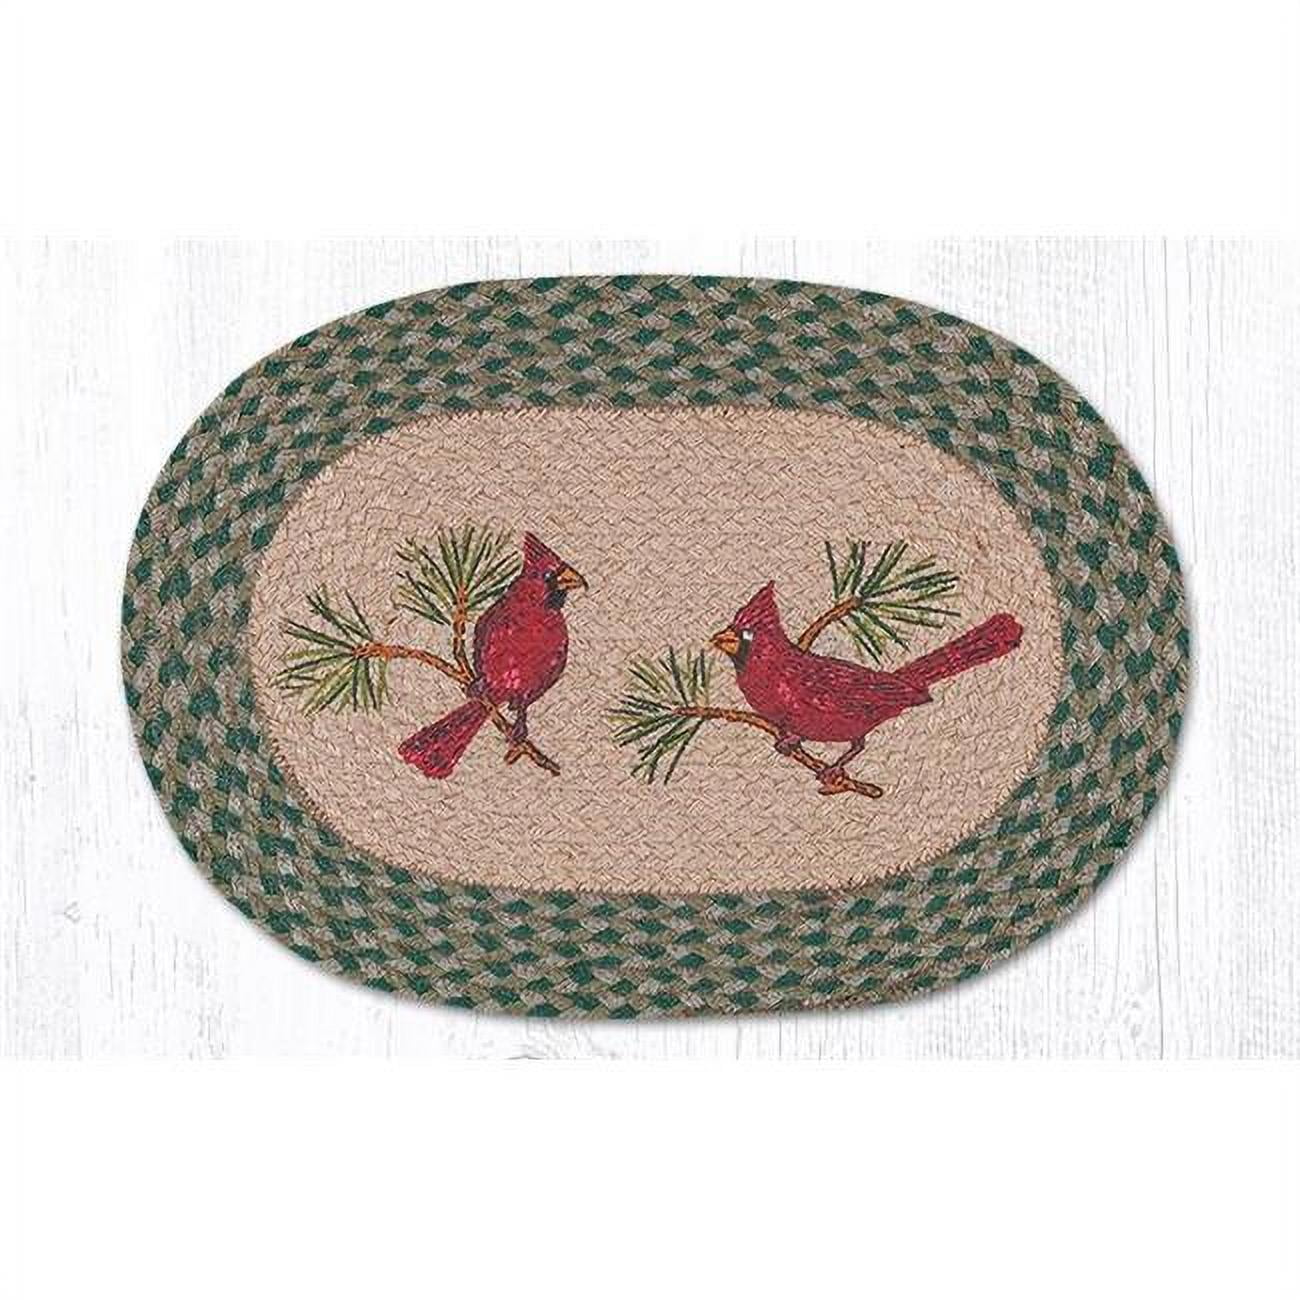 13 X 19 In. Cardinals Printed Oval Placemat